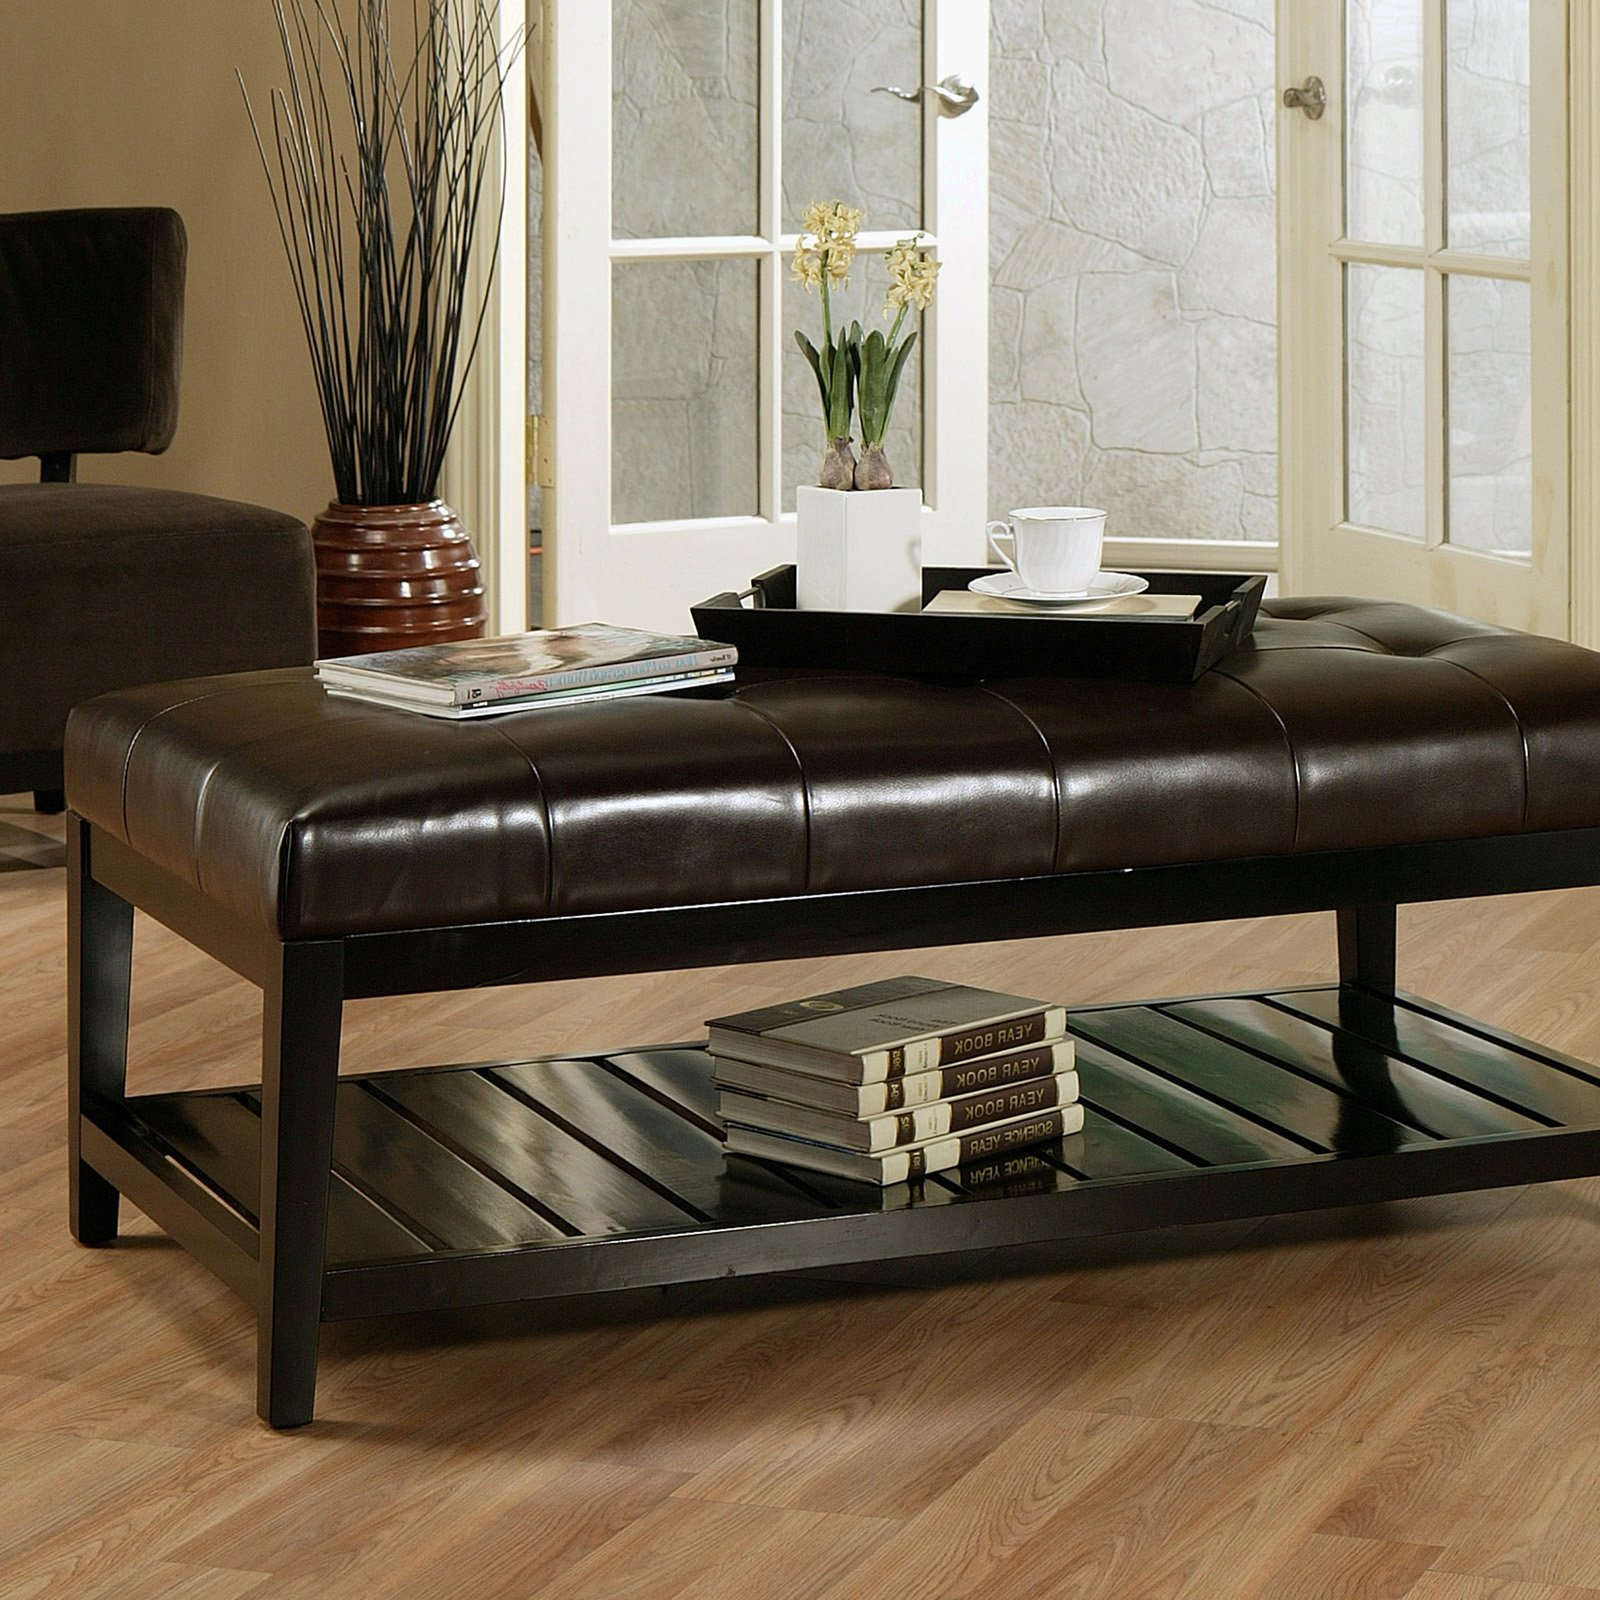 Winslow Bicast Tufted Leather Coffee Table Ottoman Walmart for size 1600 X 1600